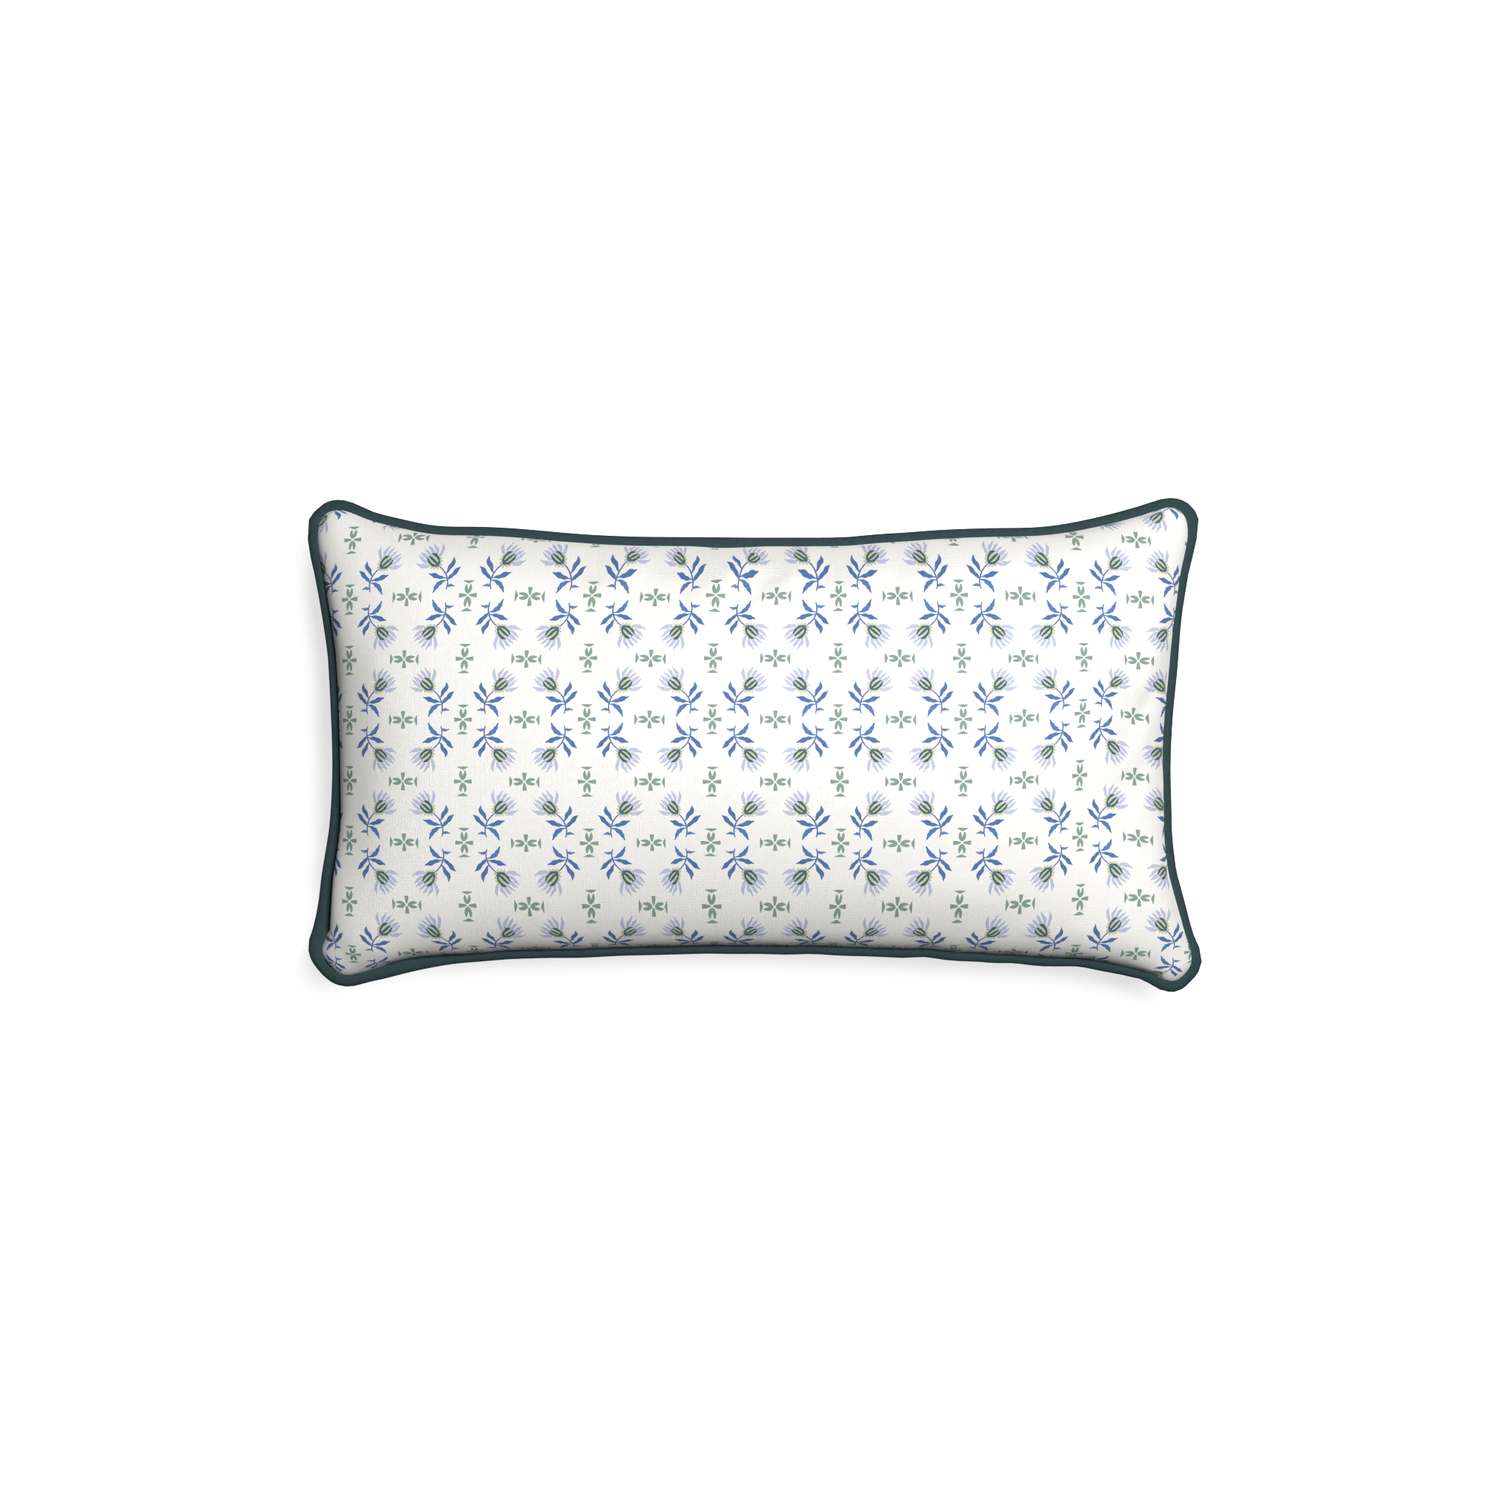 Petite-lumbar lee custom blue & green floralpillow with p piping on white background